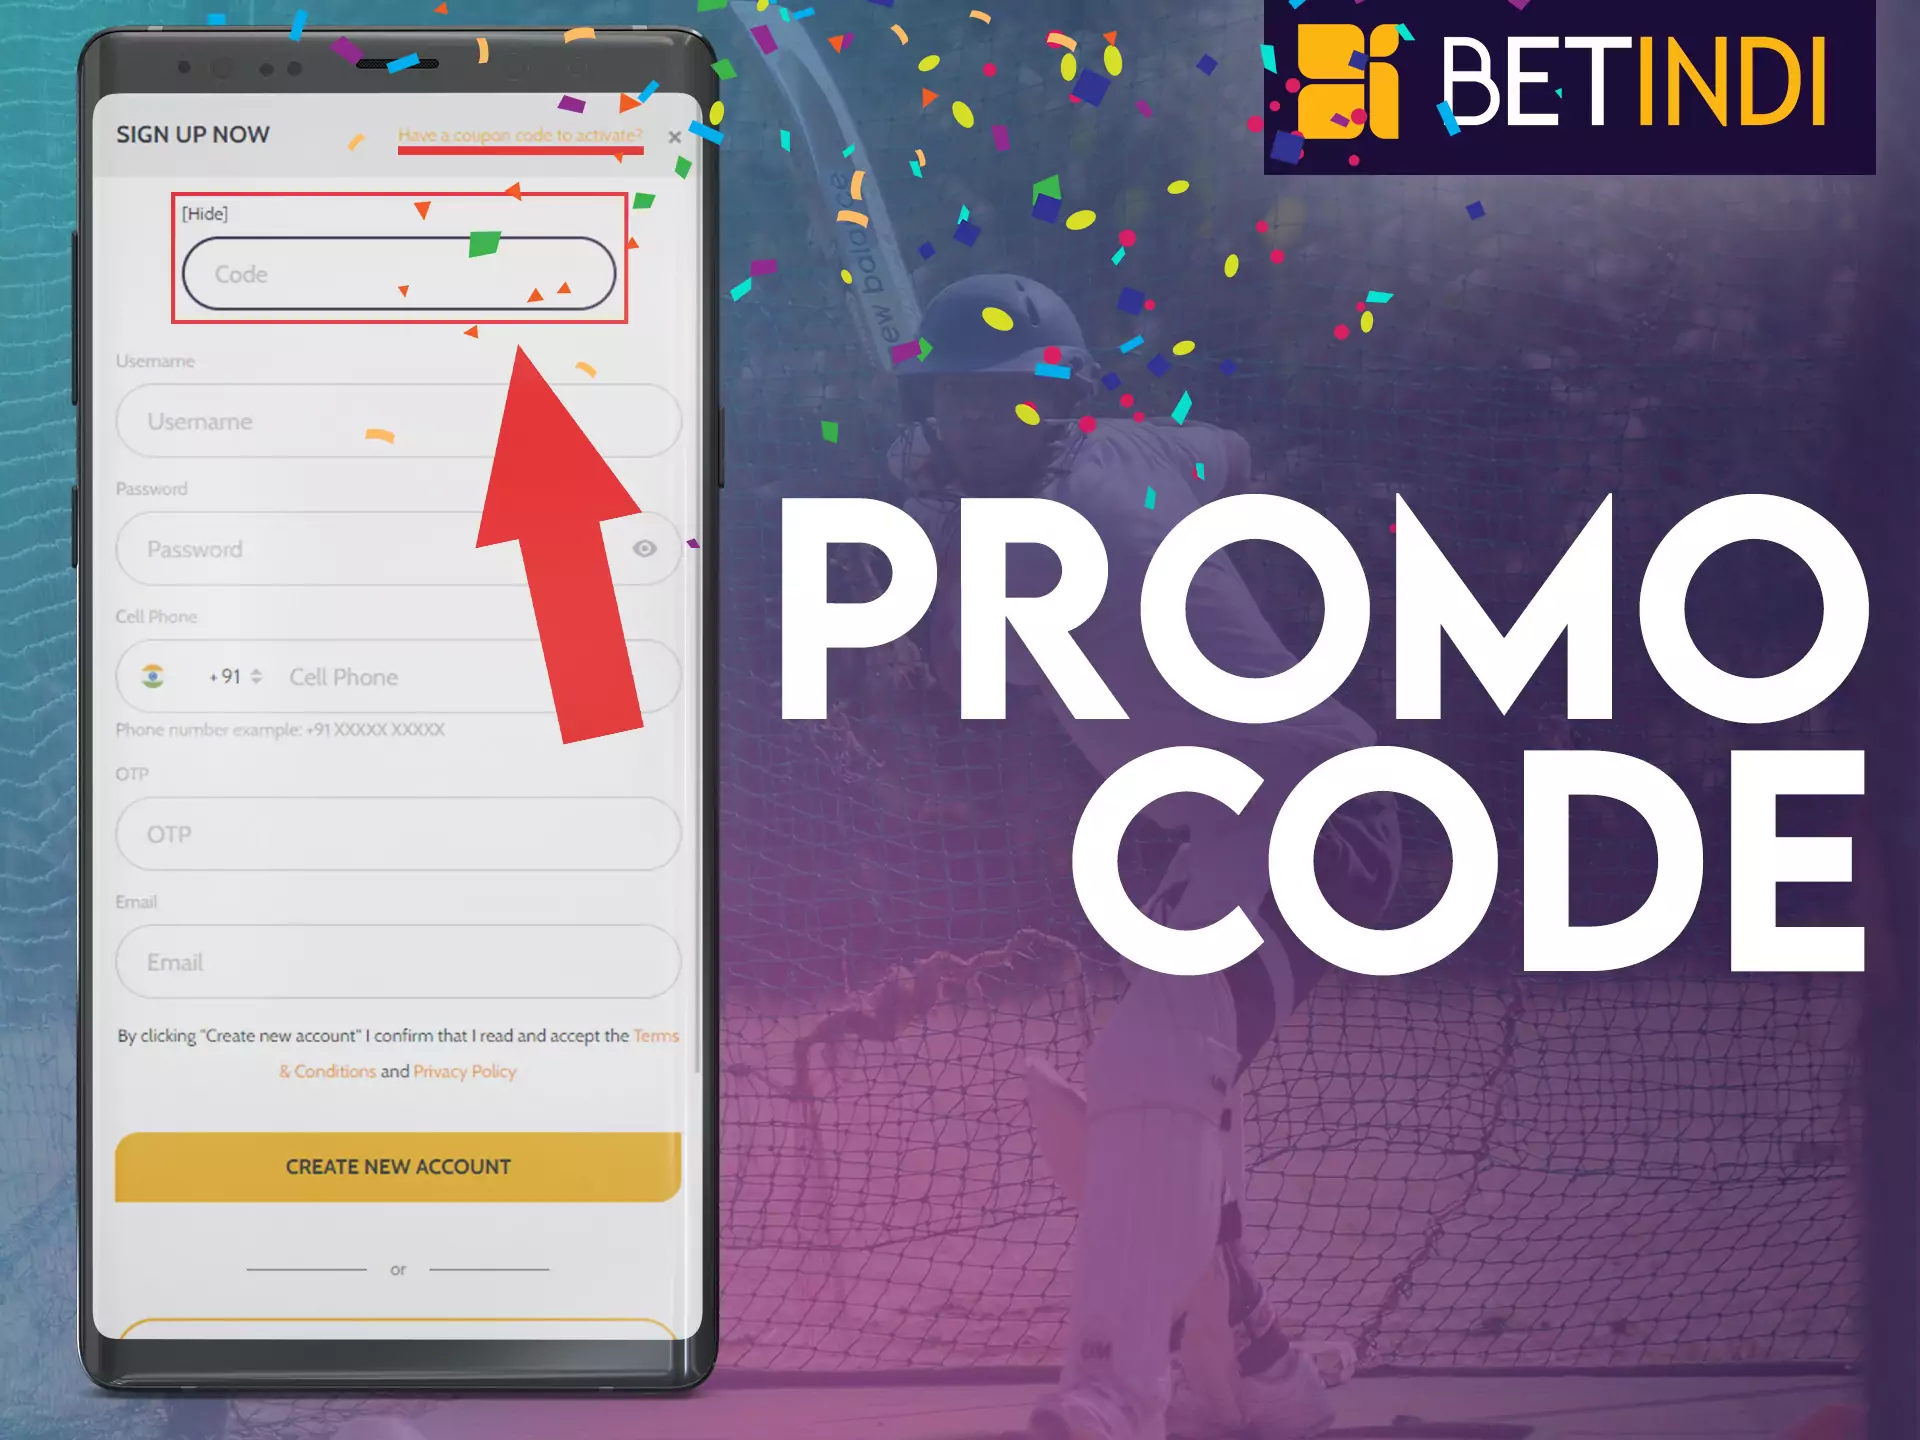 Use a special promo code Betindi and get bonuses.